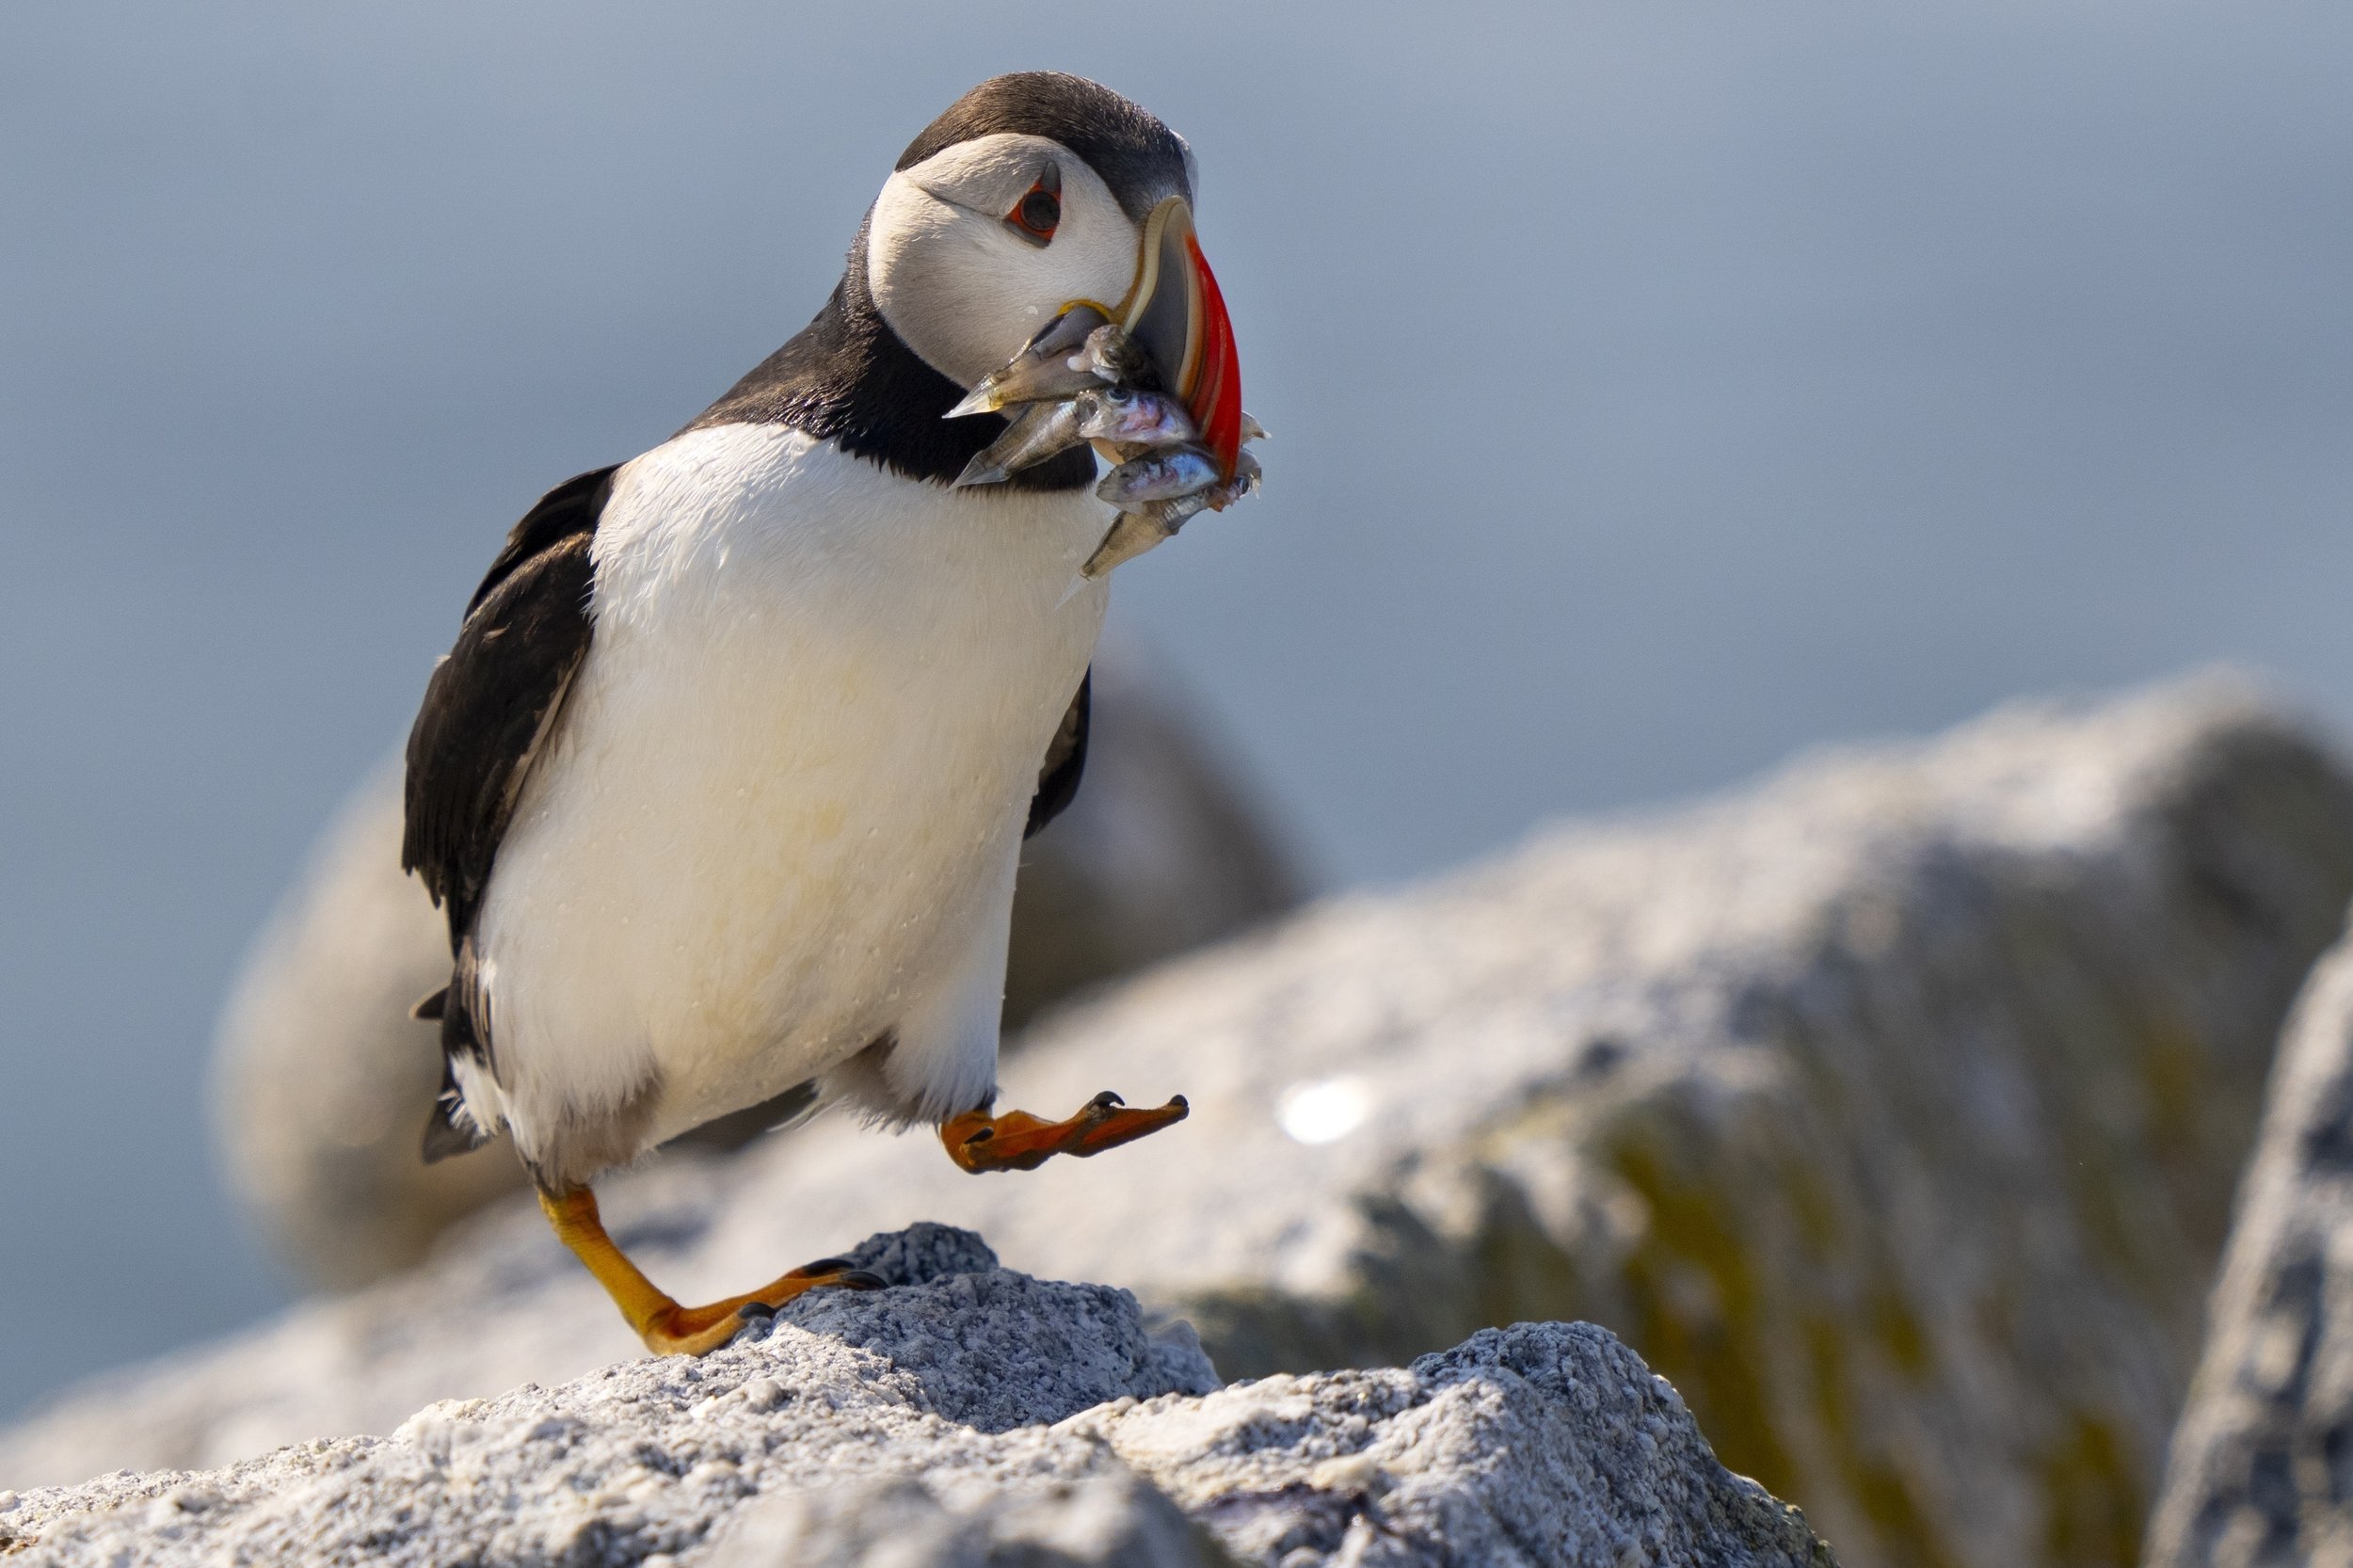  An Atlantic puffin brings a beak full of baitfish to feed its chick in a burrow under rocks on Eastern Egg Rock, a small island off the coast of Maine on Aug. 5, 2023. (AP Photo/Robert F. Bukaty) 